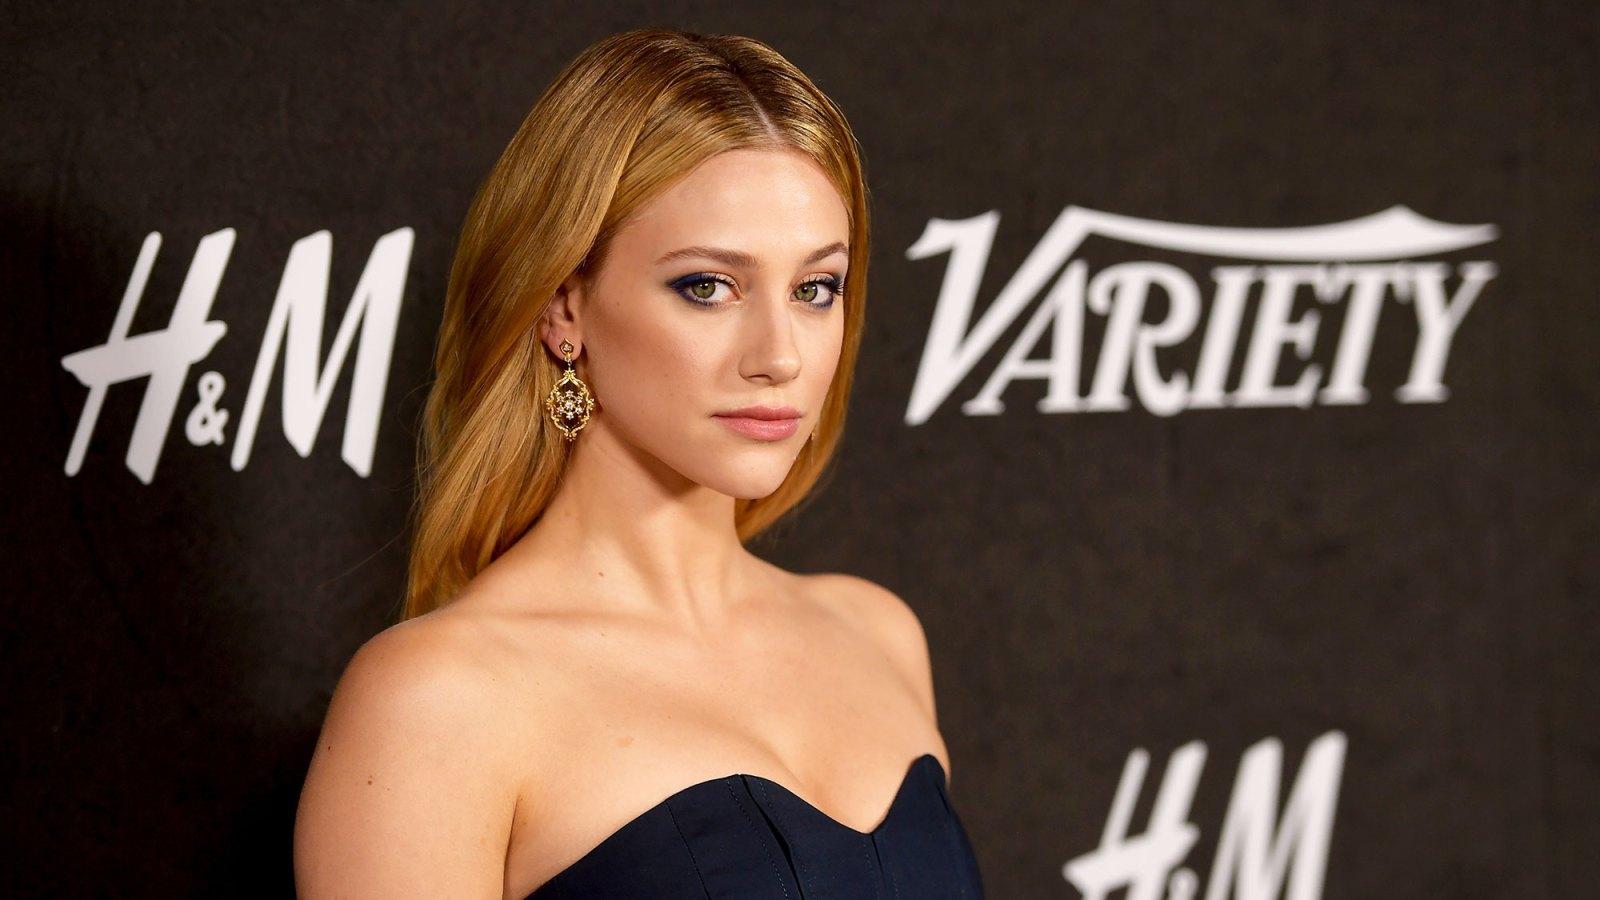 Lili Reinhart Returns to Twitter After Two Week Hiatus With a Message For Her Haters